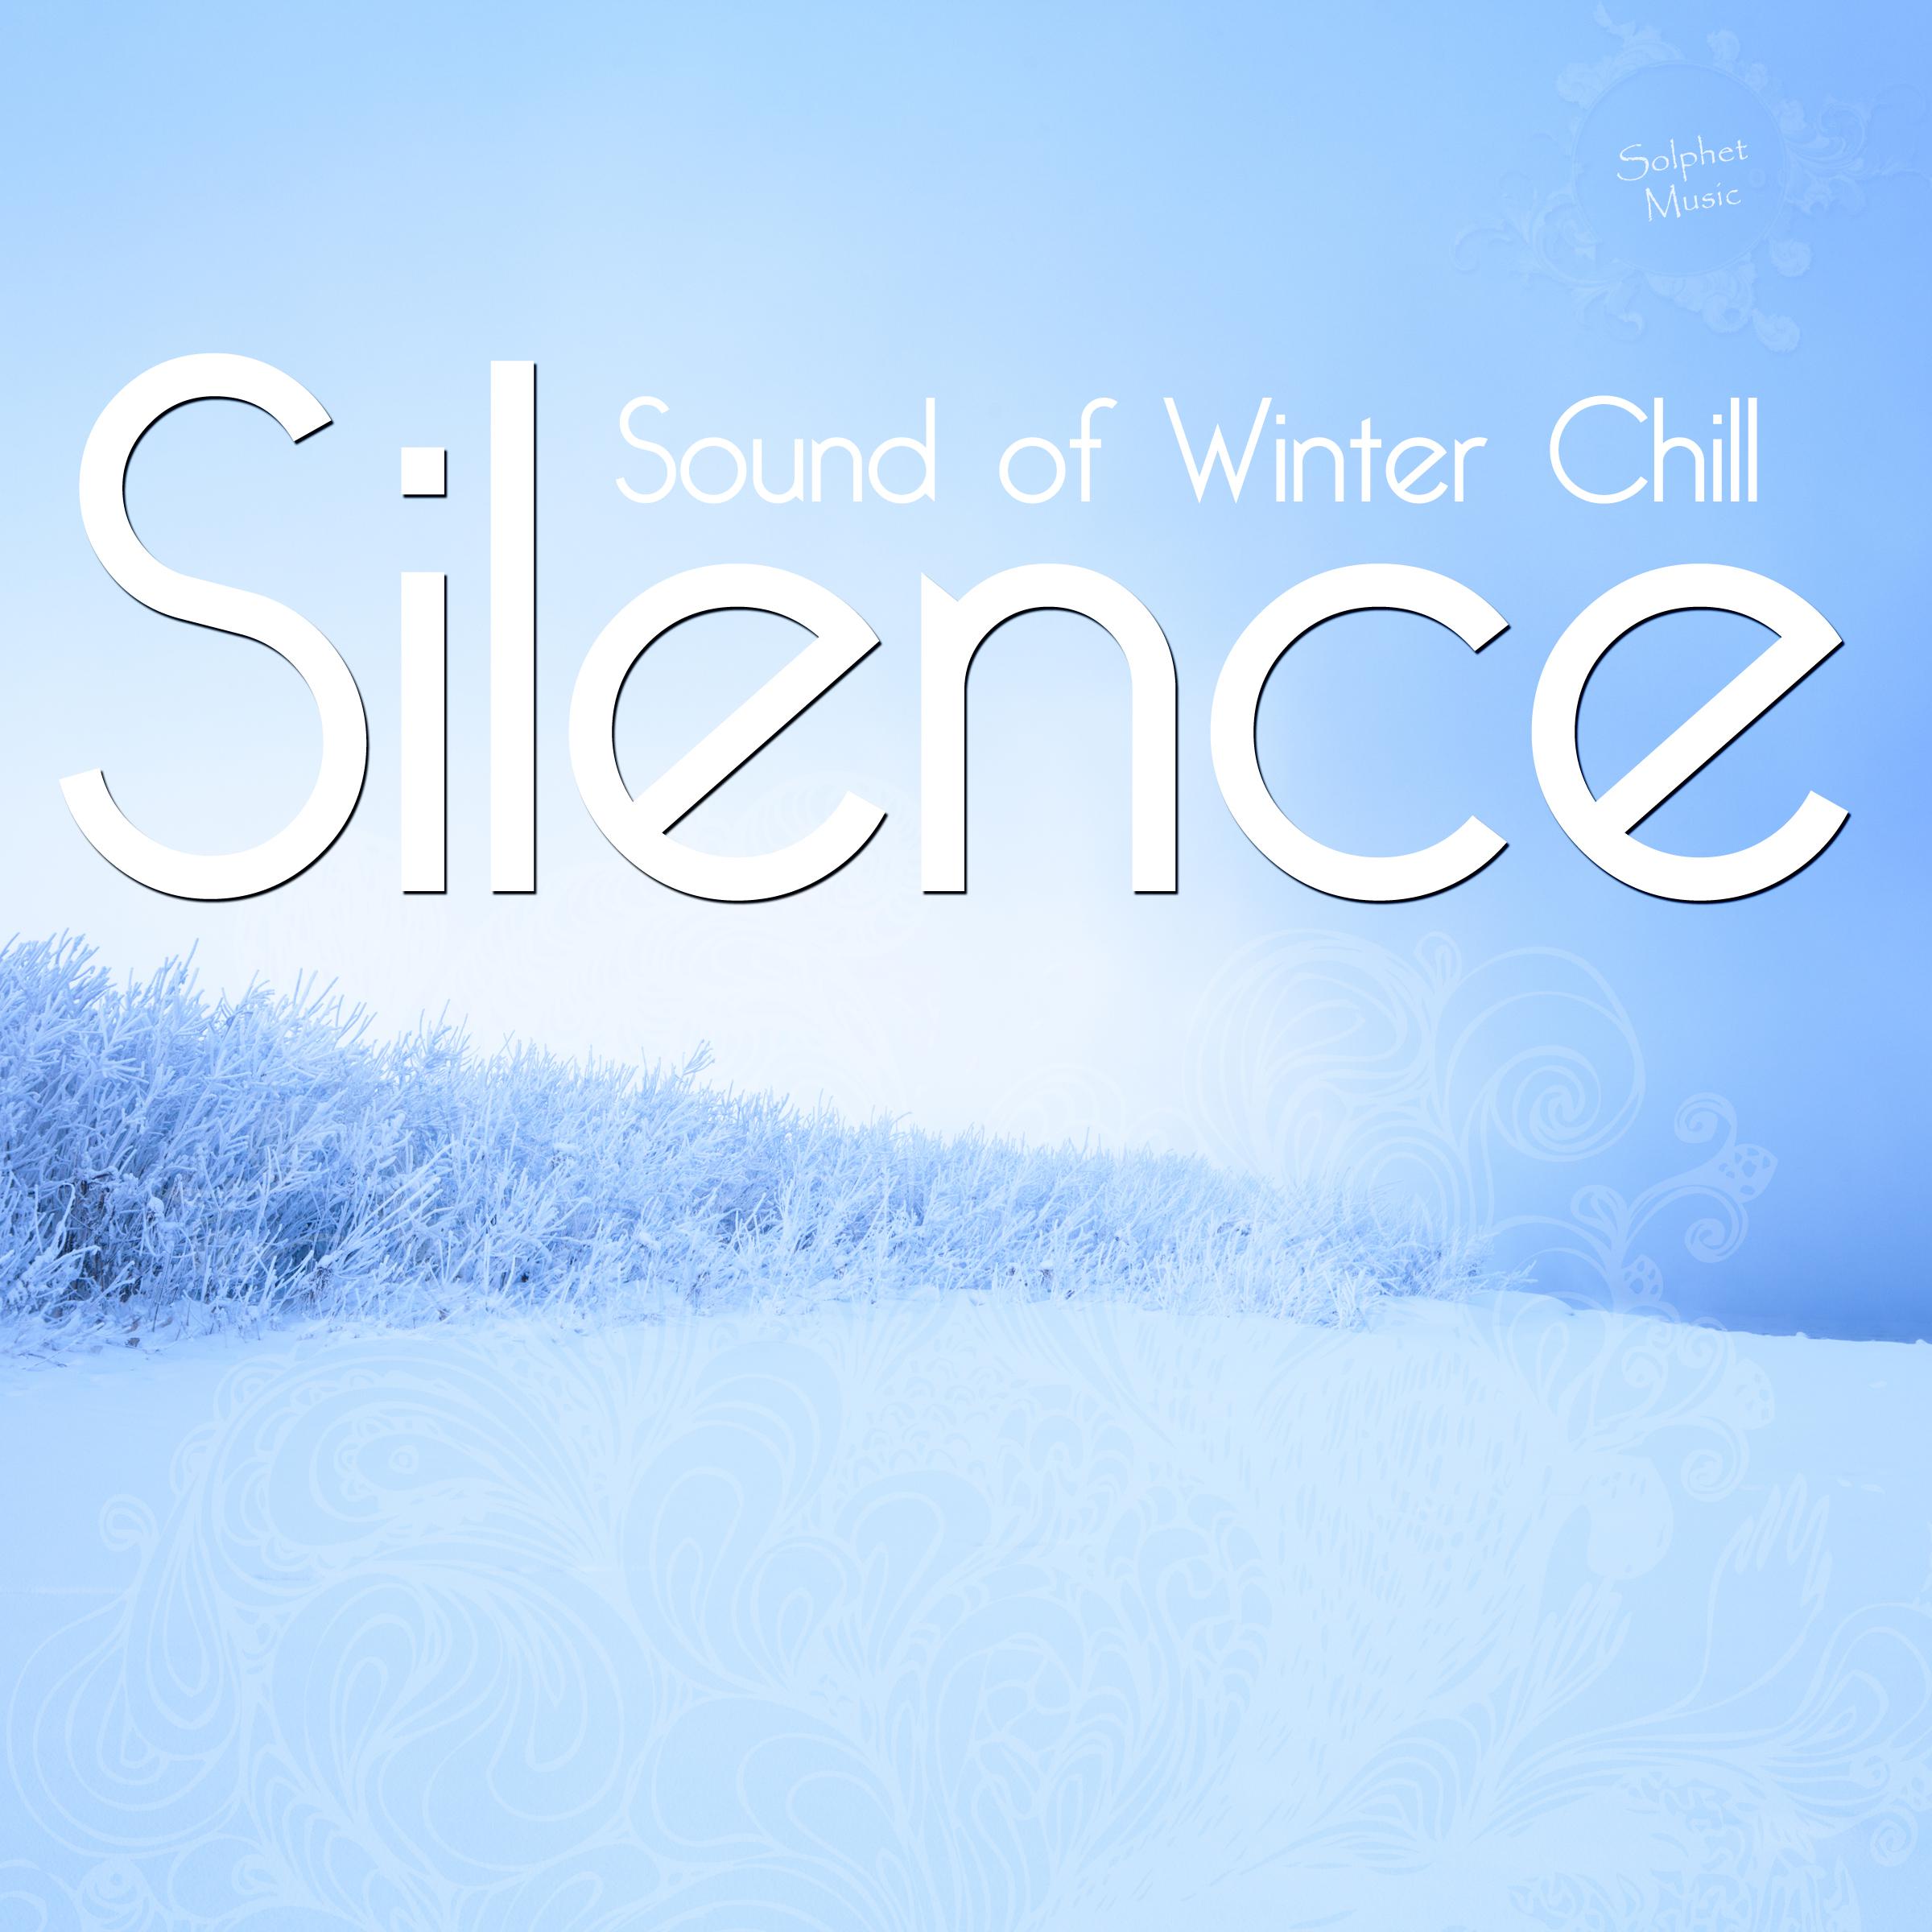 Silence - Sound of the Winter Chill